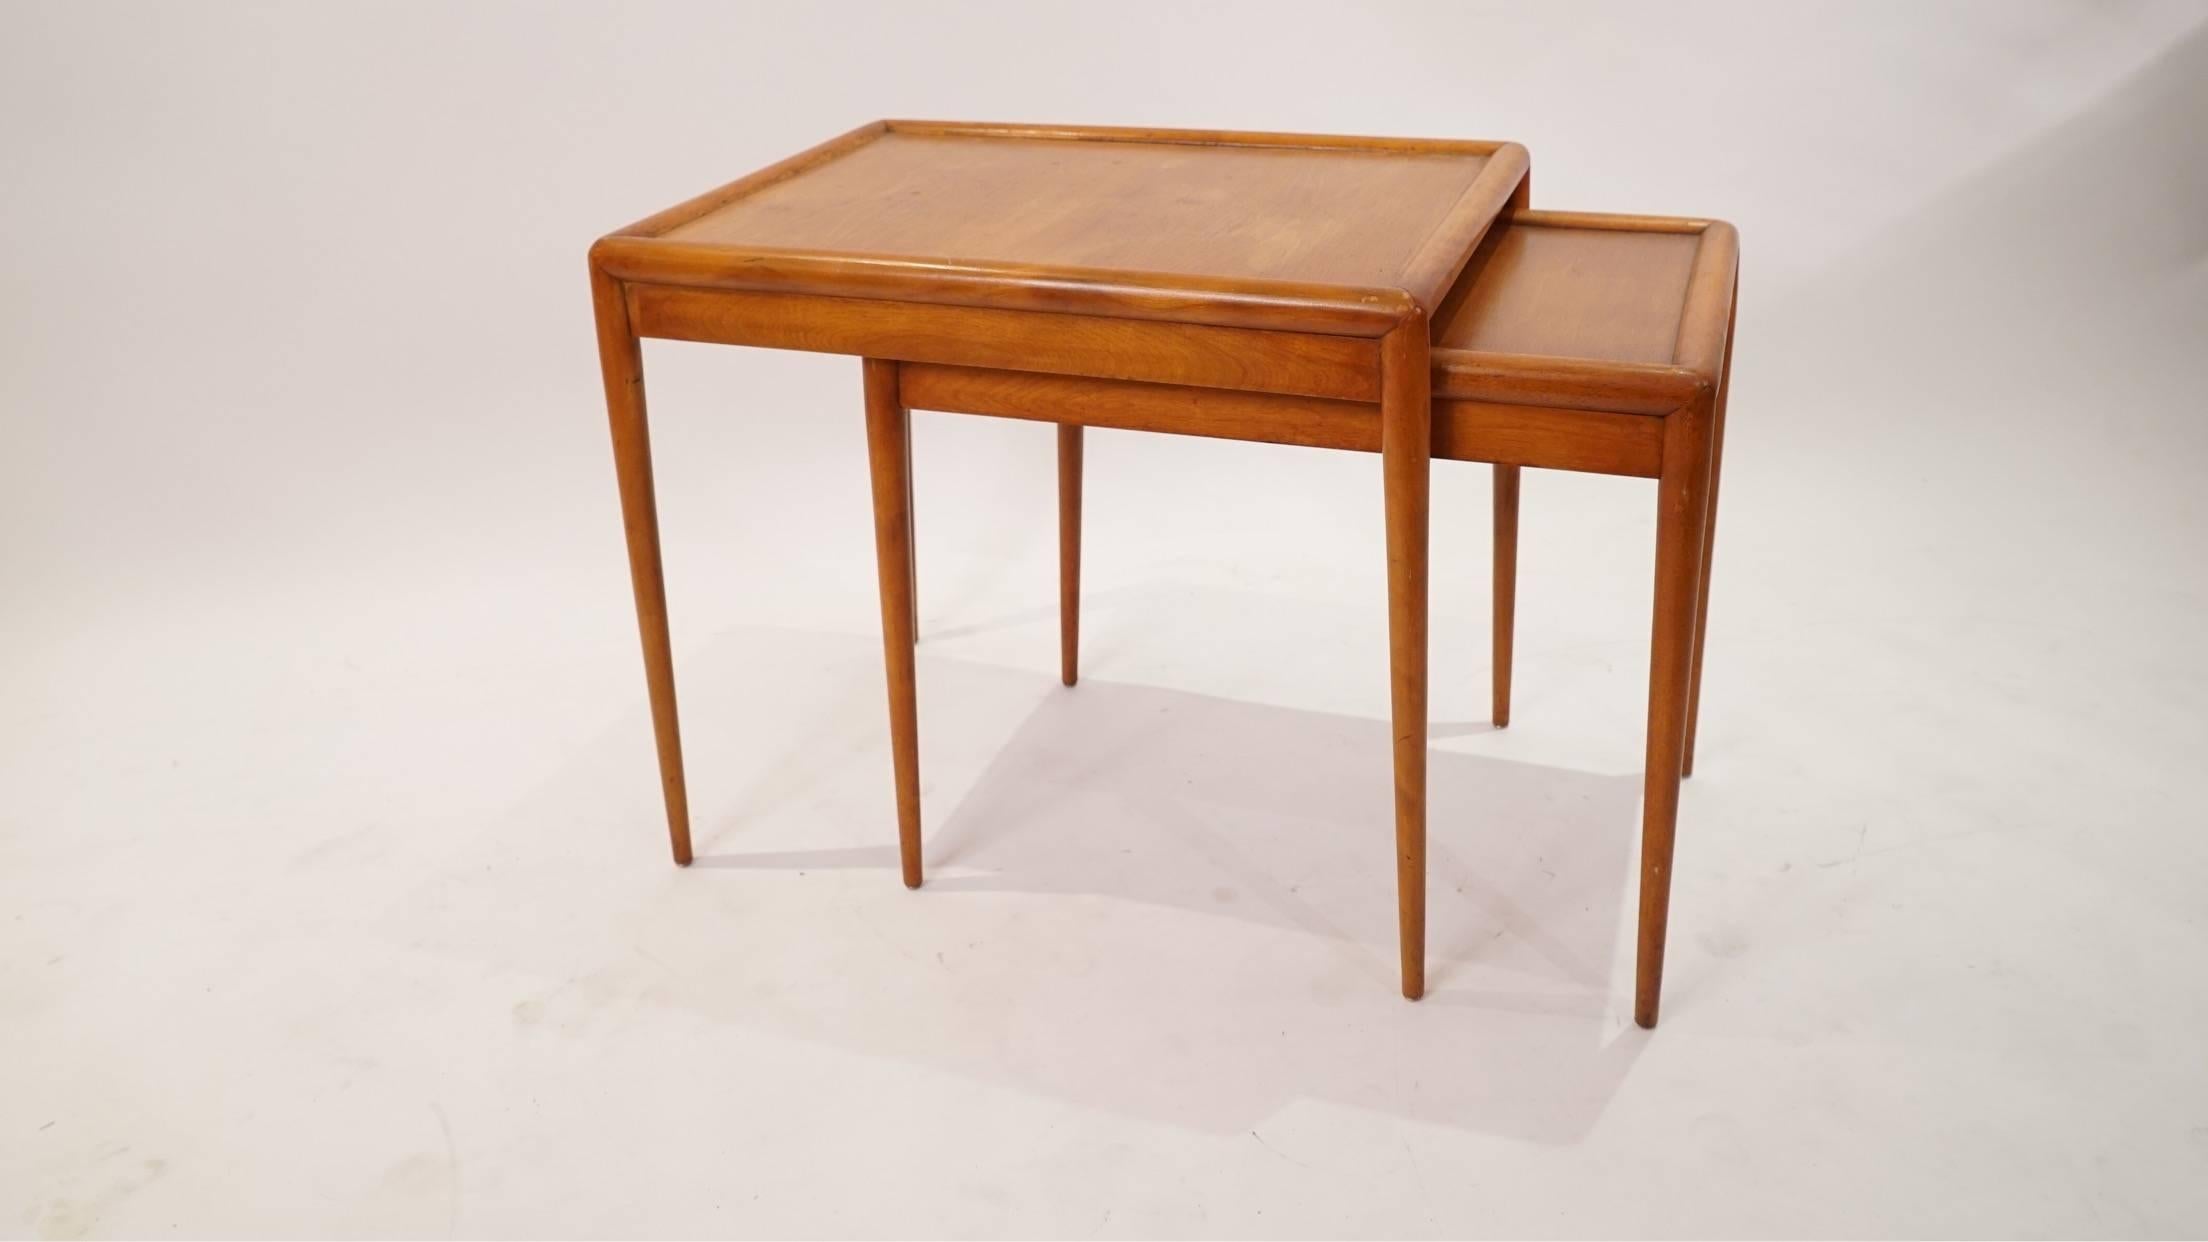 A beautiful pair of Model No. 1783 Mid-Century nesting tables by American designer T.H. Robsjohn Gibbins. This set is an early 1952 production for Widdicomb. The set is in fair vintage condition. Some minor losses to the finish and some